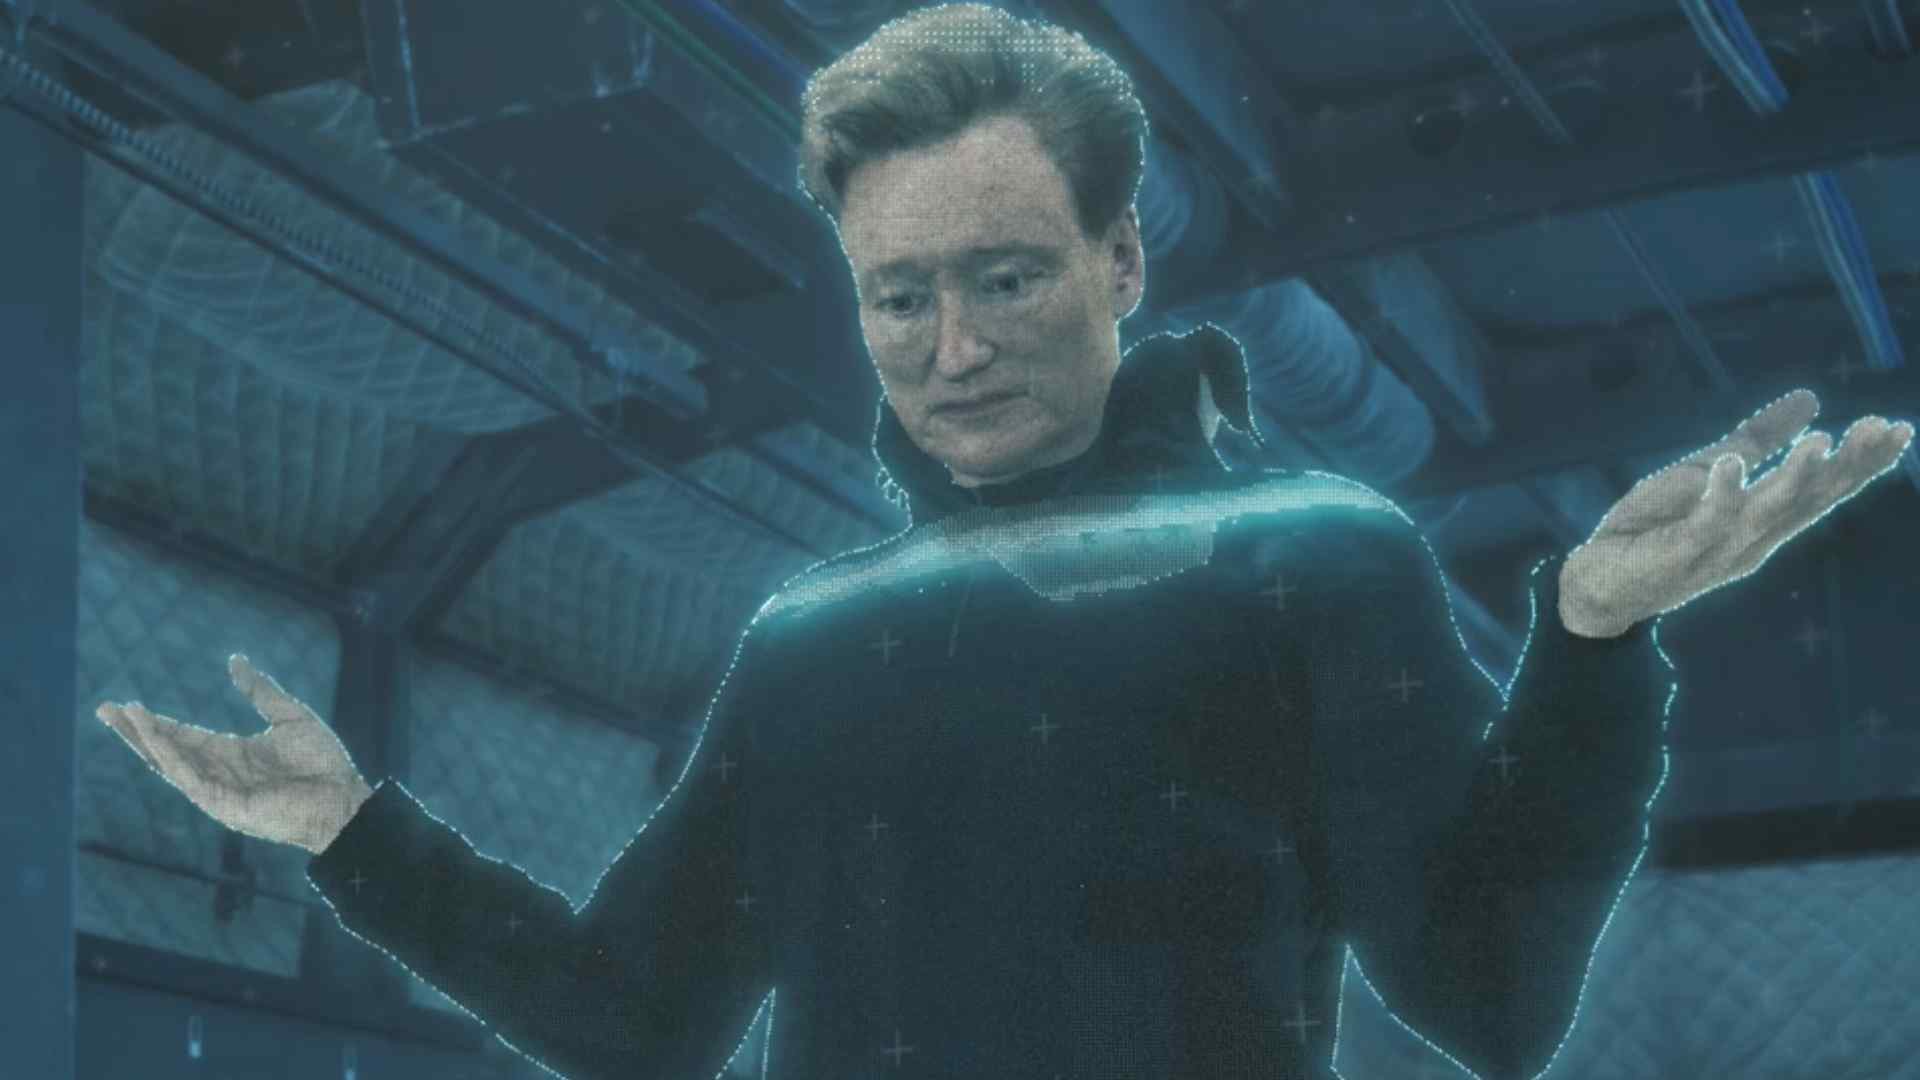 celebrities in video games - conan o'brien video game character